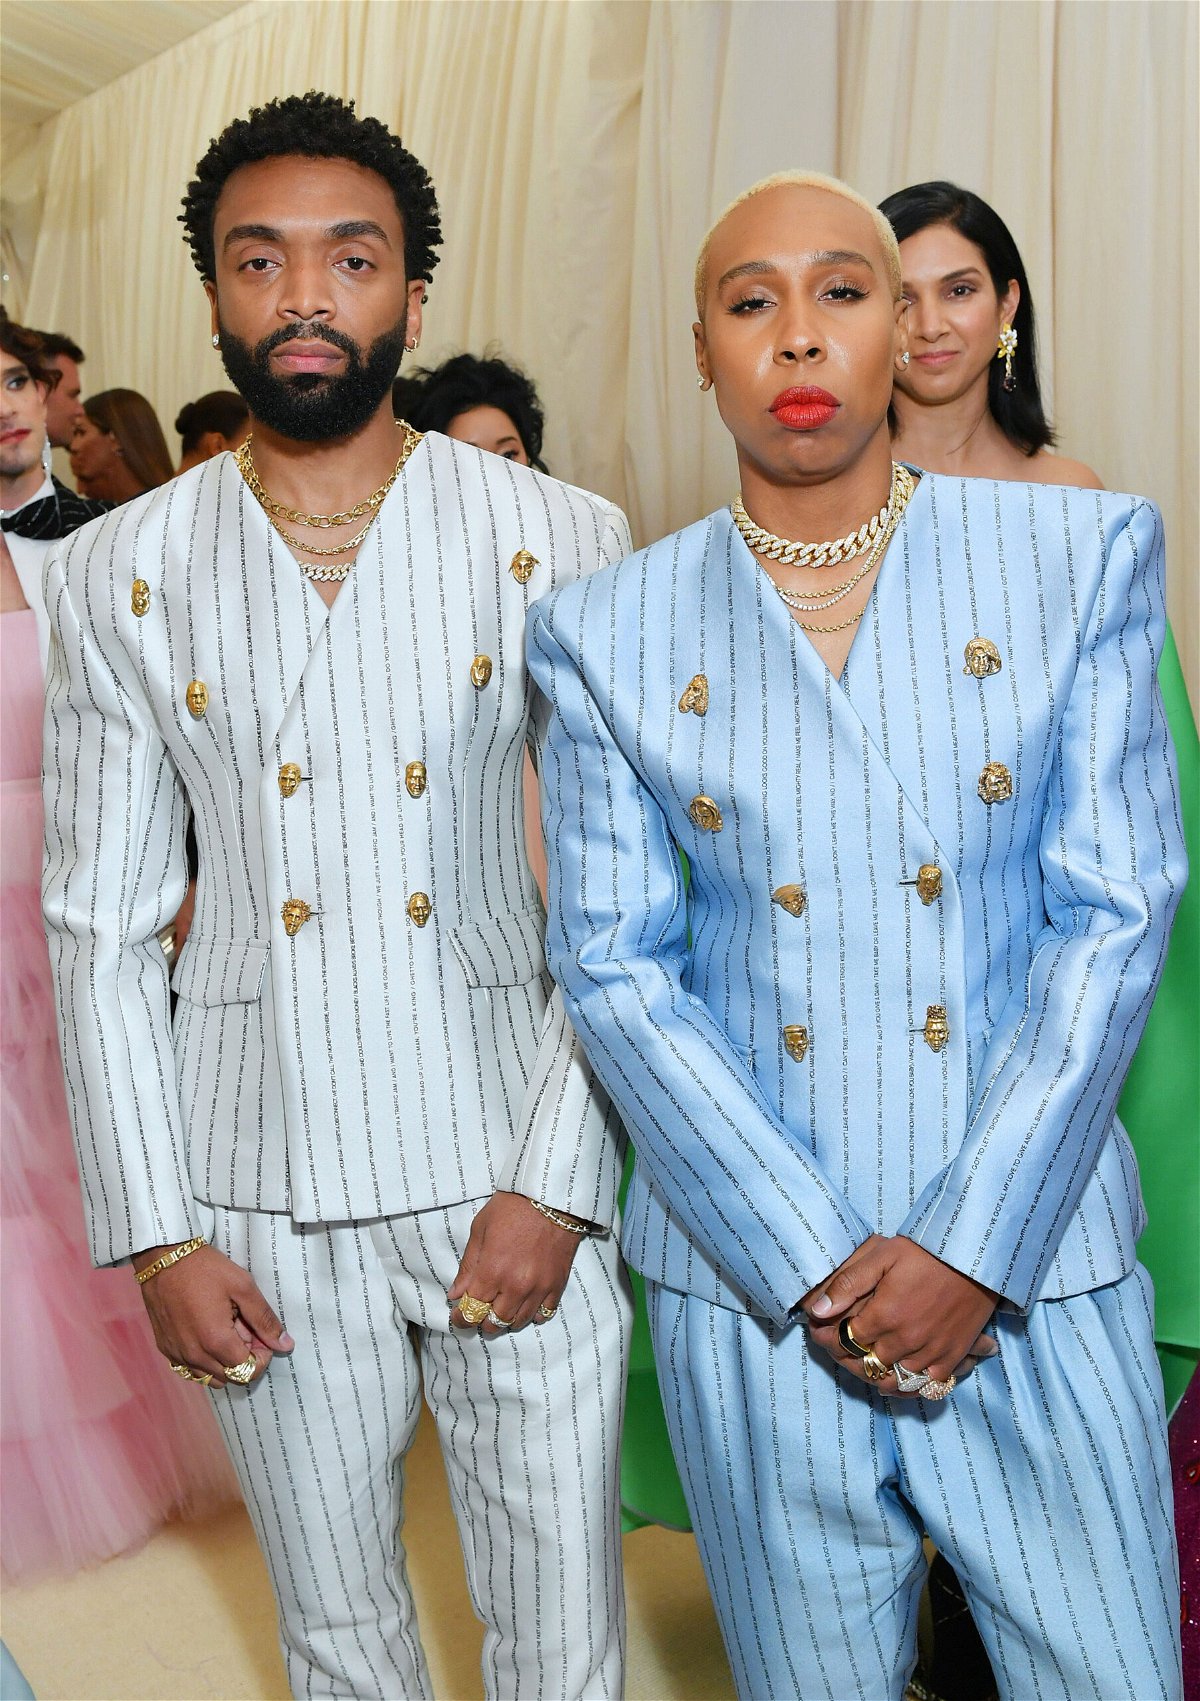 <i>Mike Coppola/Getty Images</i><br/>Pyer Moss founder Kerby Jean-Raymond and actor Lena Waithe both wearing suits with custom Johnny Nelson buttons to the 2019 Met Gala.